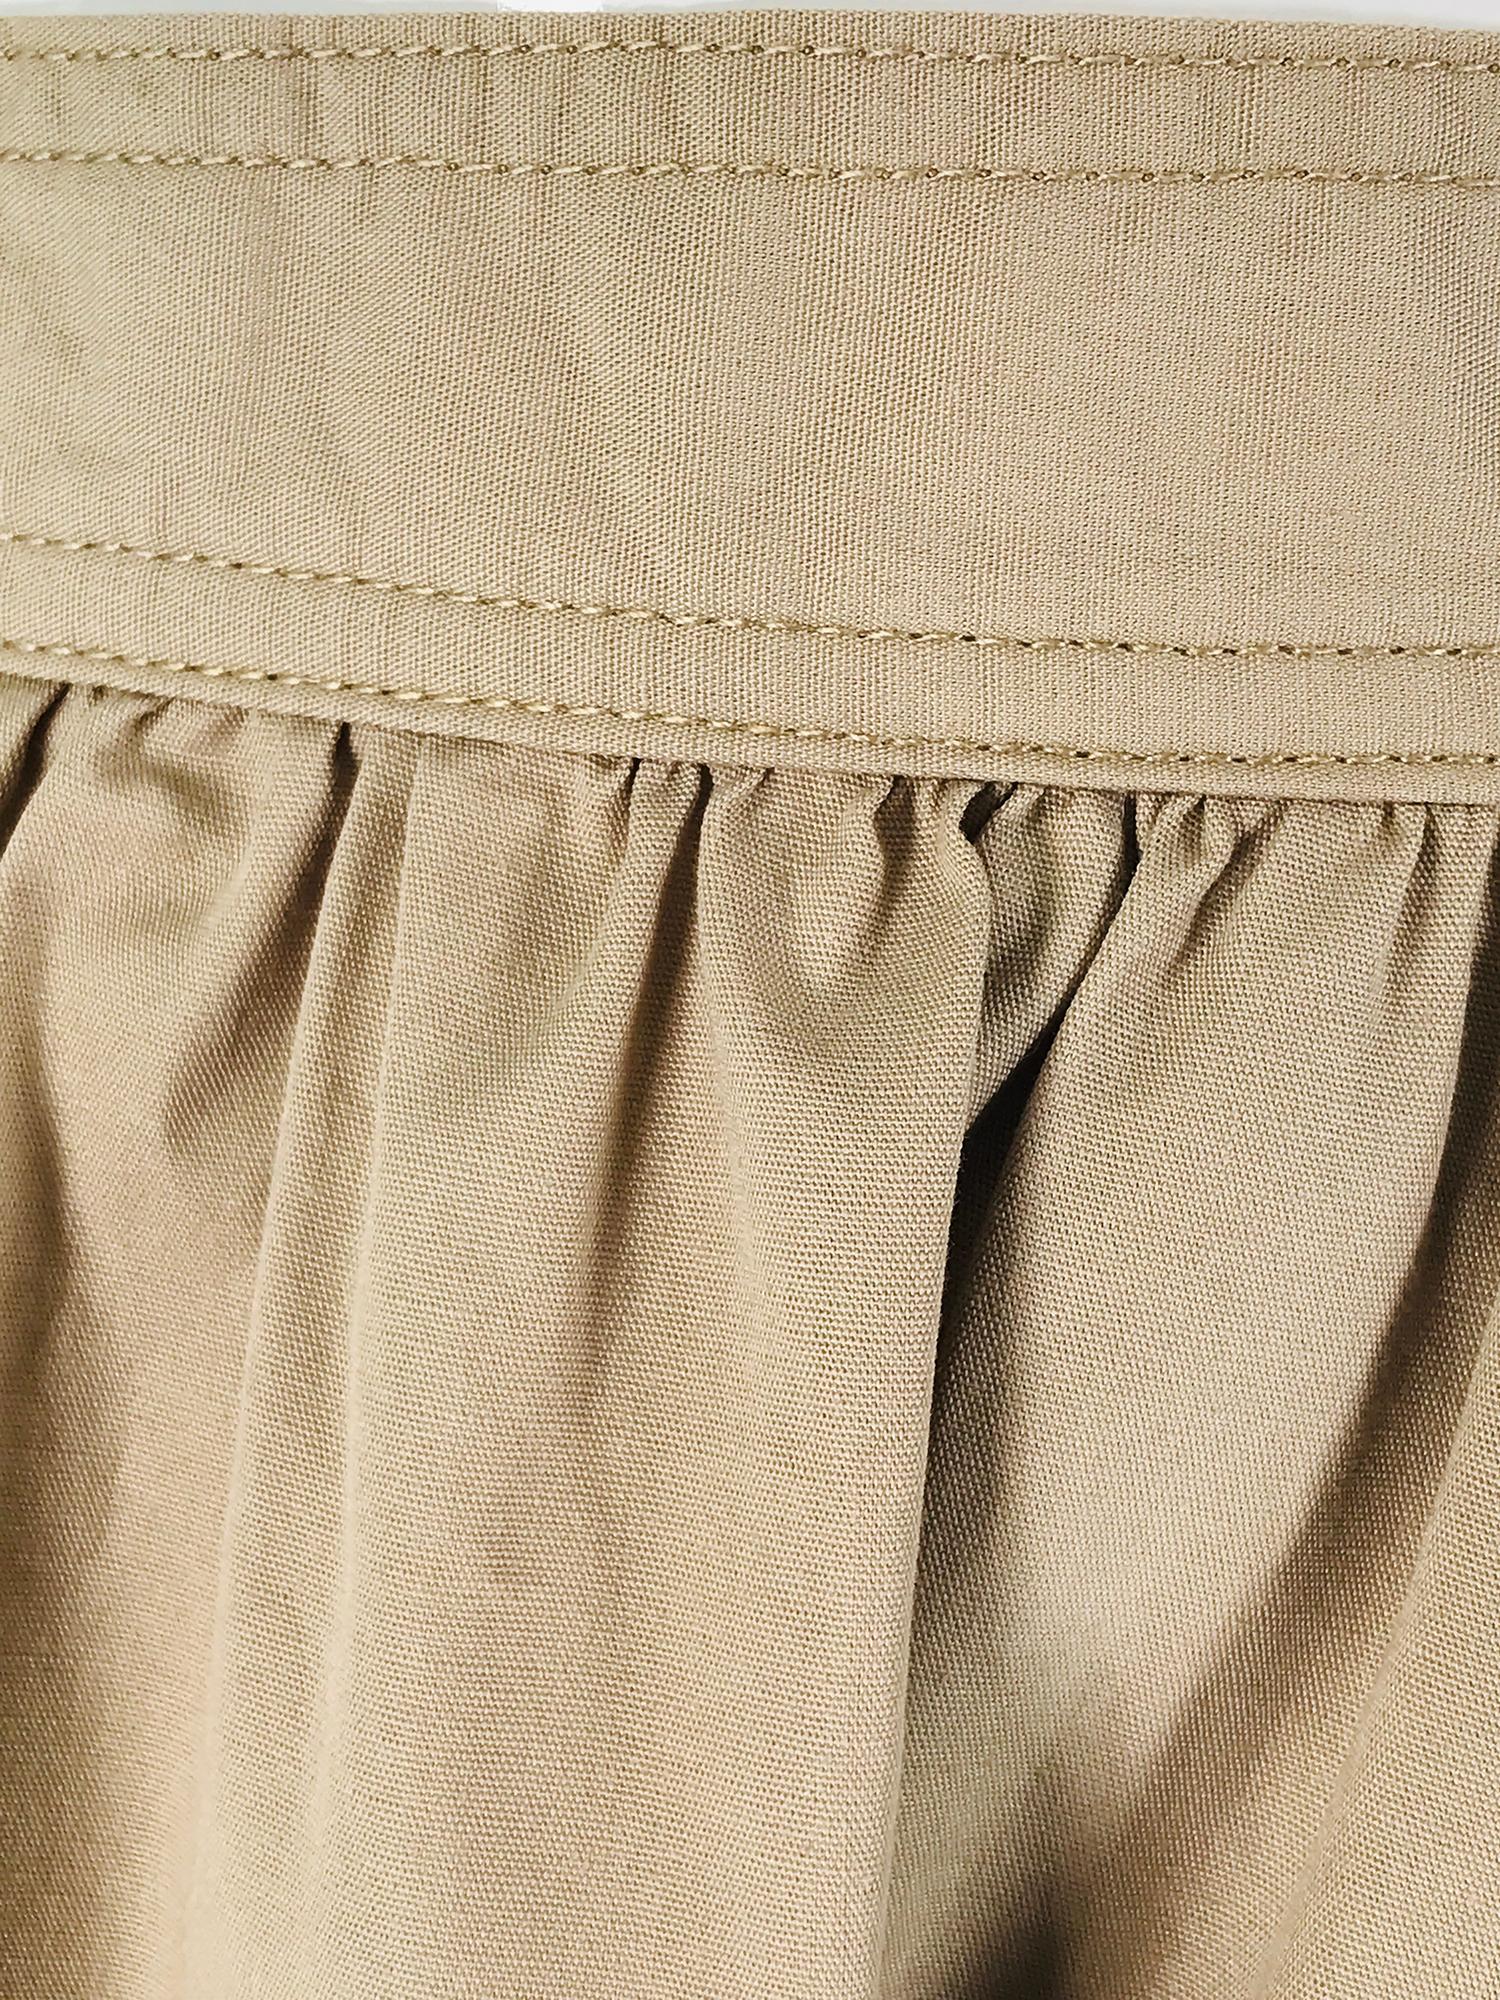 Vintage Chanel Tan Poplin Gathered Skirt with Button Pockets 3